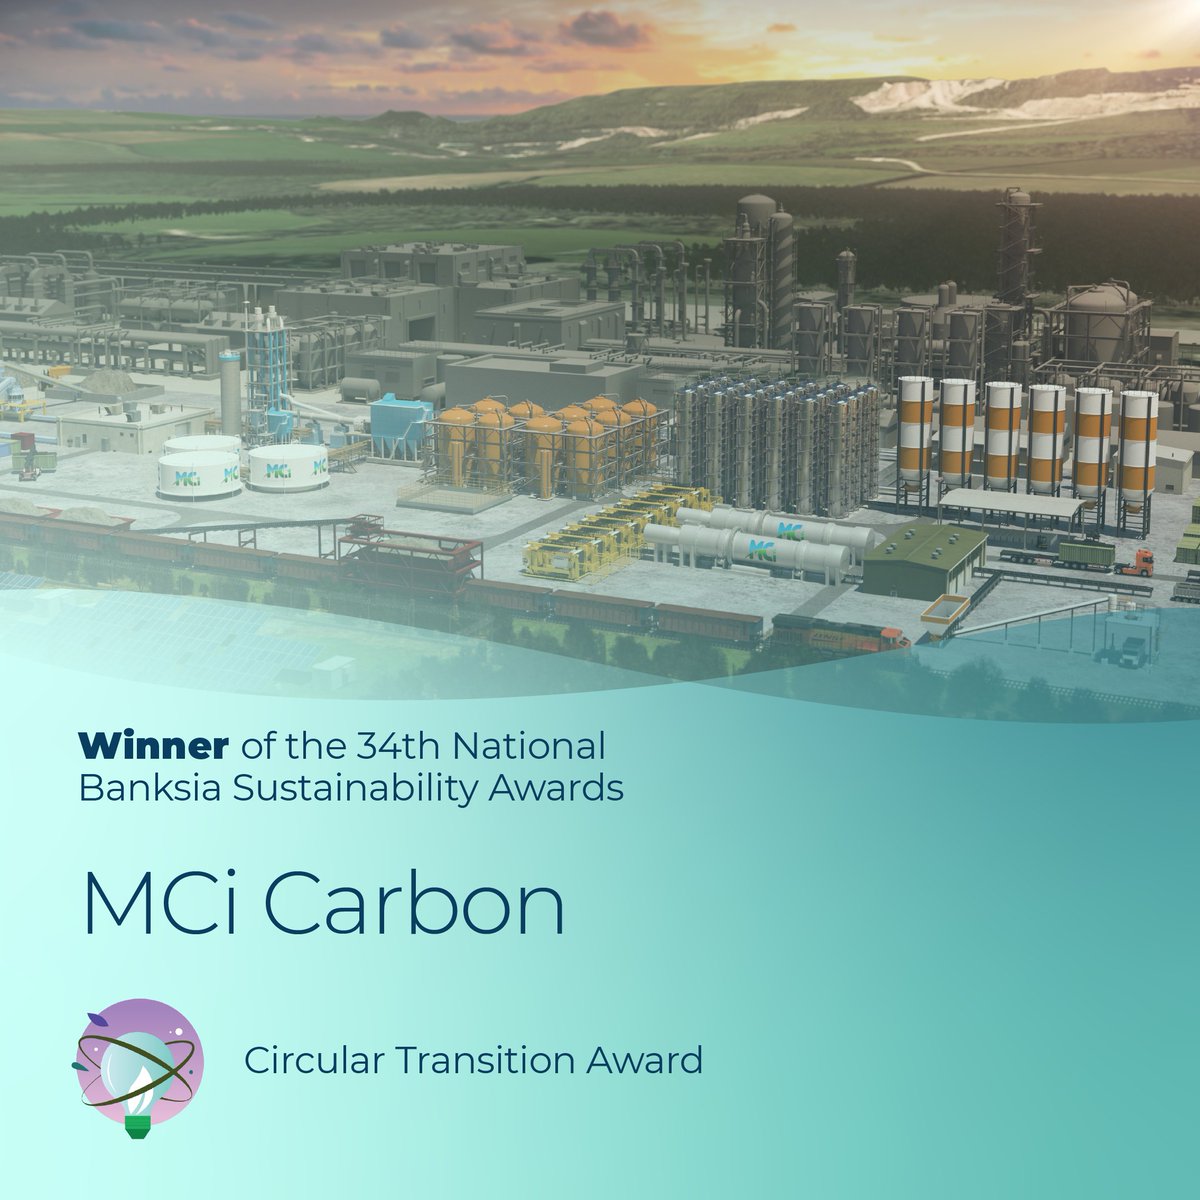 Congratulations to MCi Carbon for winning the Circular Transition Award. Their clean technology transforms carbon dioxide into valuable industrial products, helping to contribute to the goal of zero emissions.